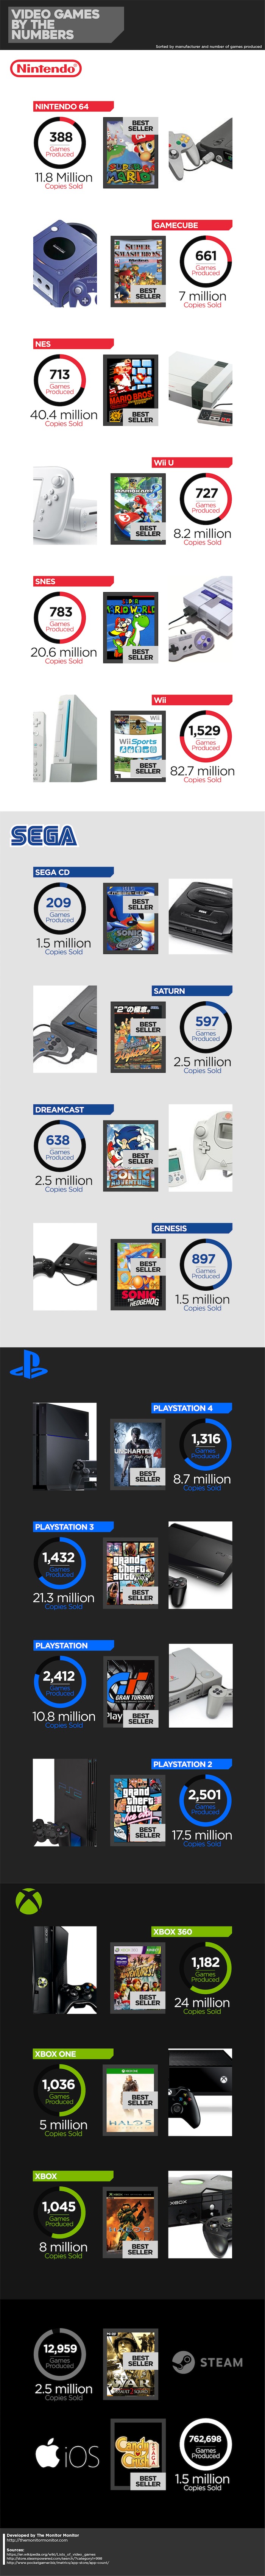 Video Games By The Numbers from The Monitor Monitor